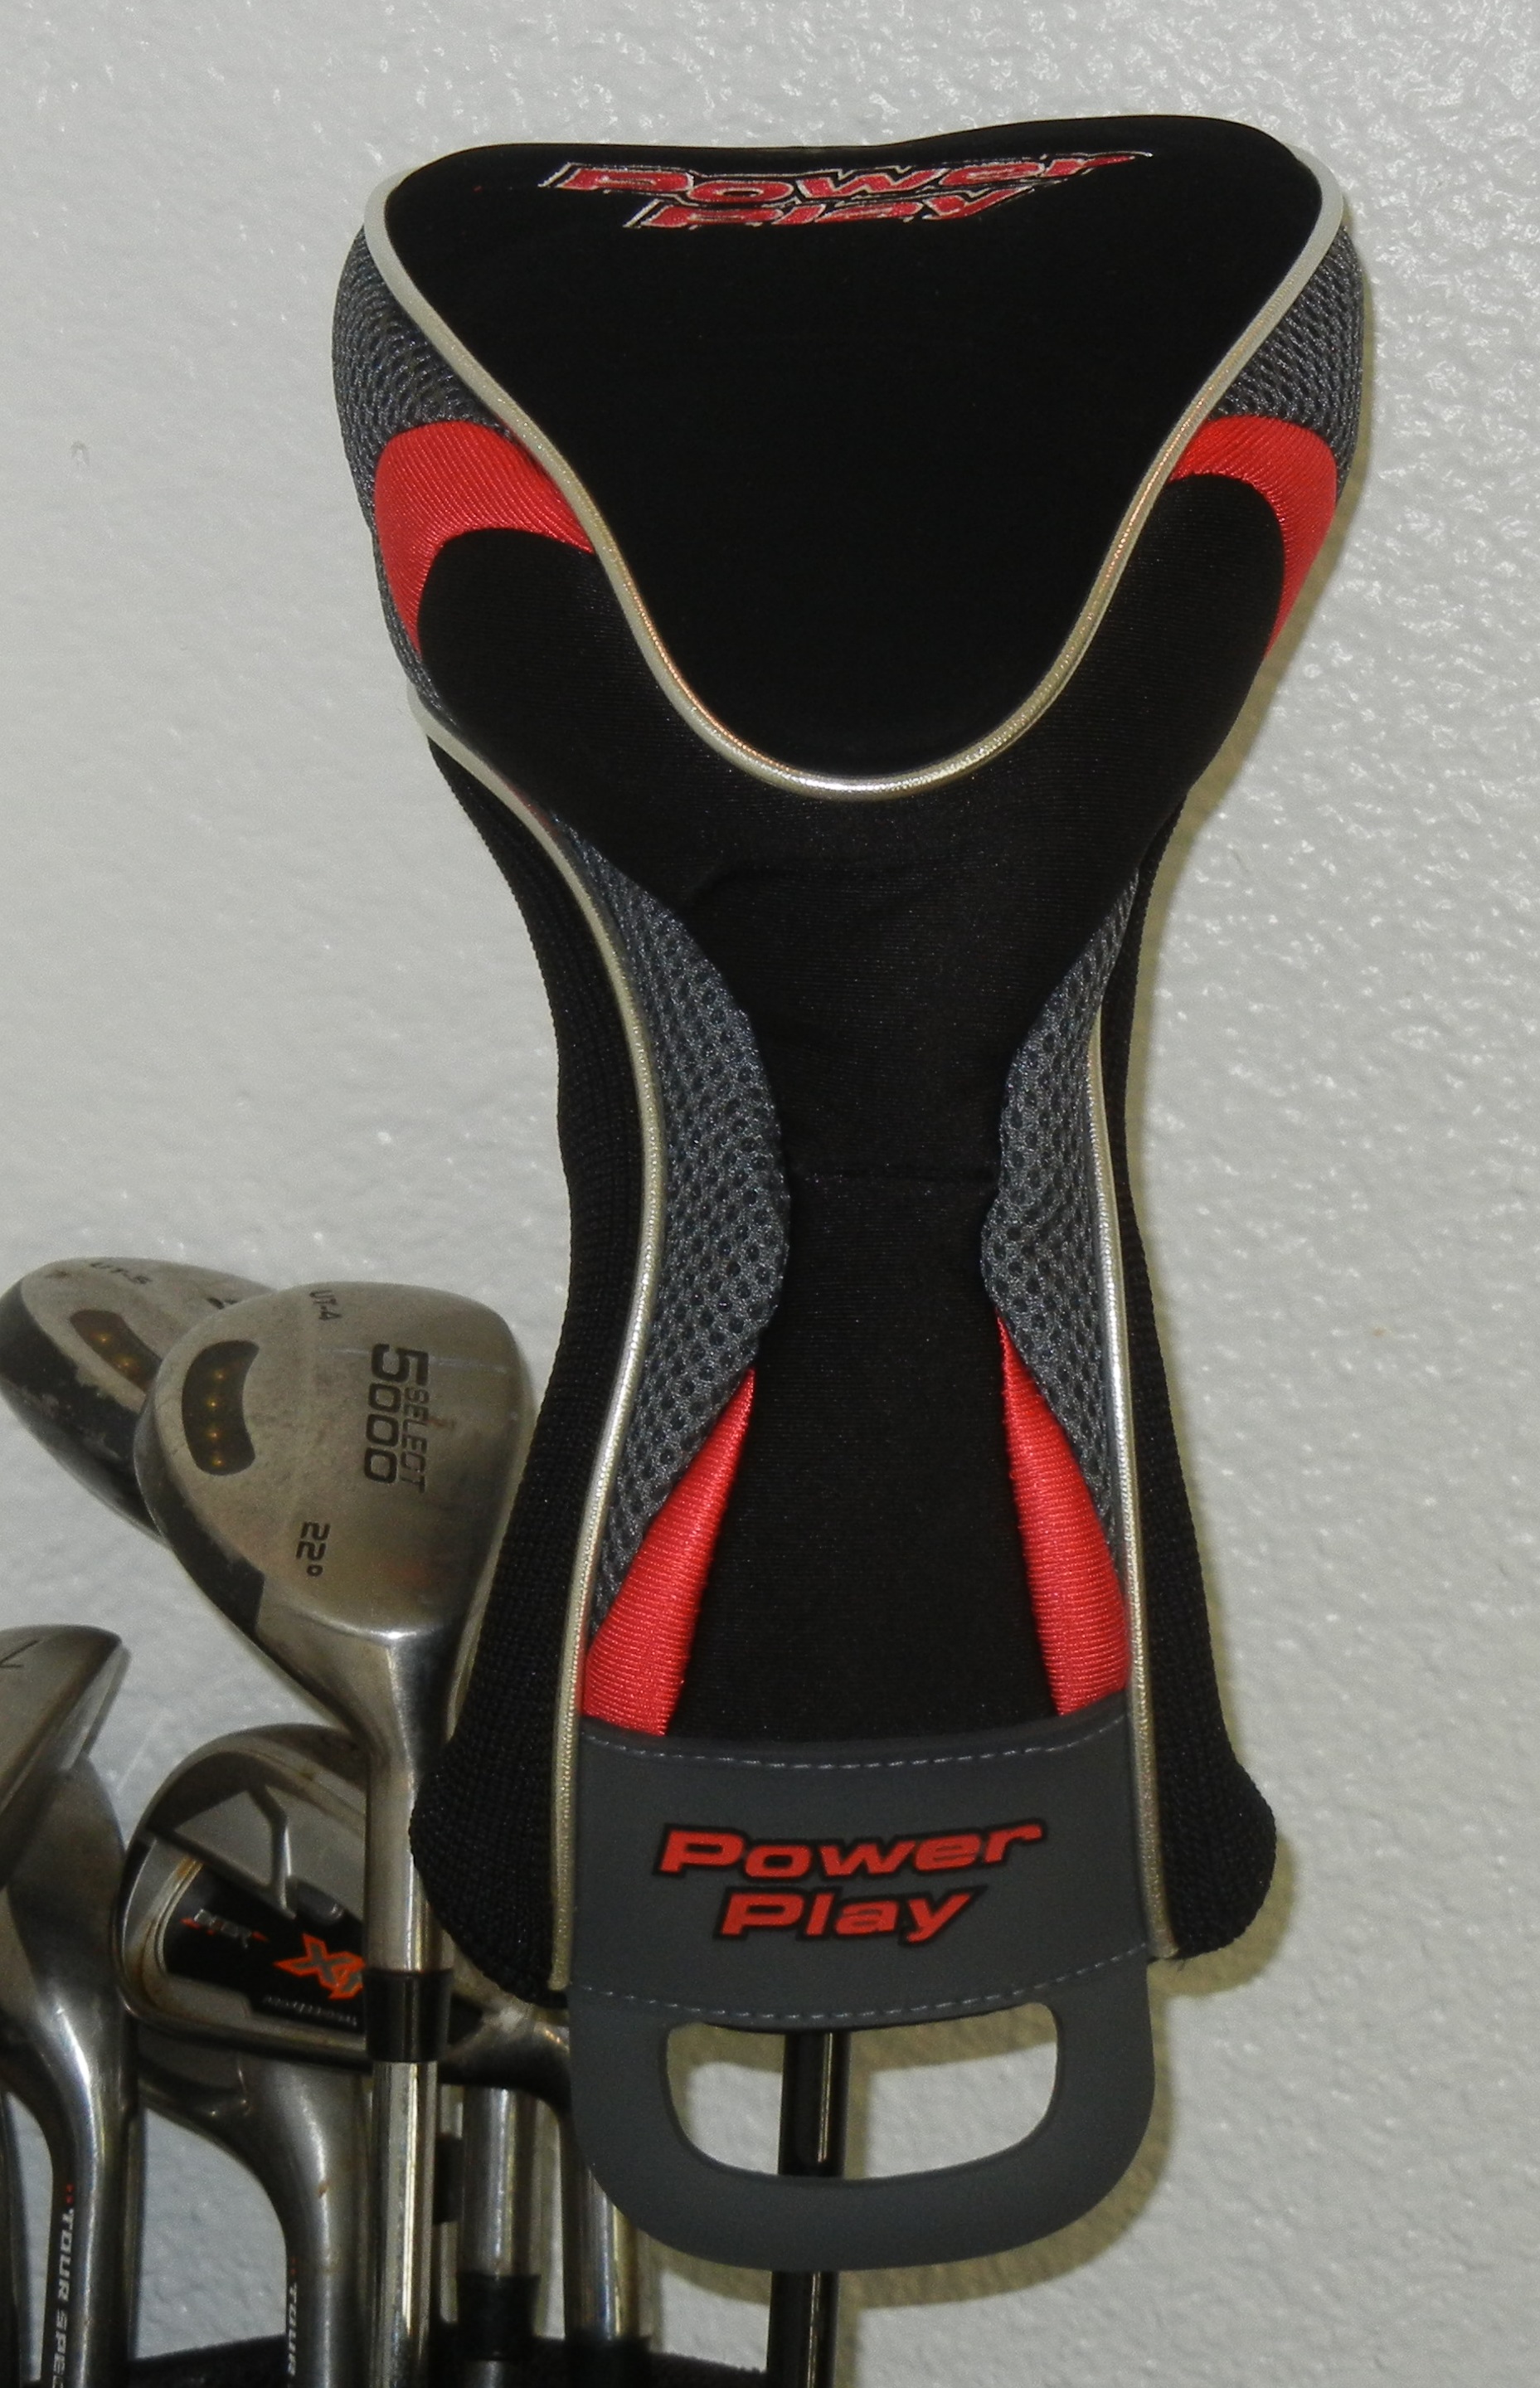 power play driver headcover